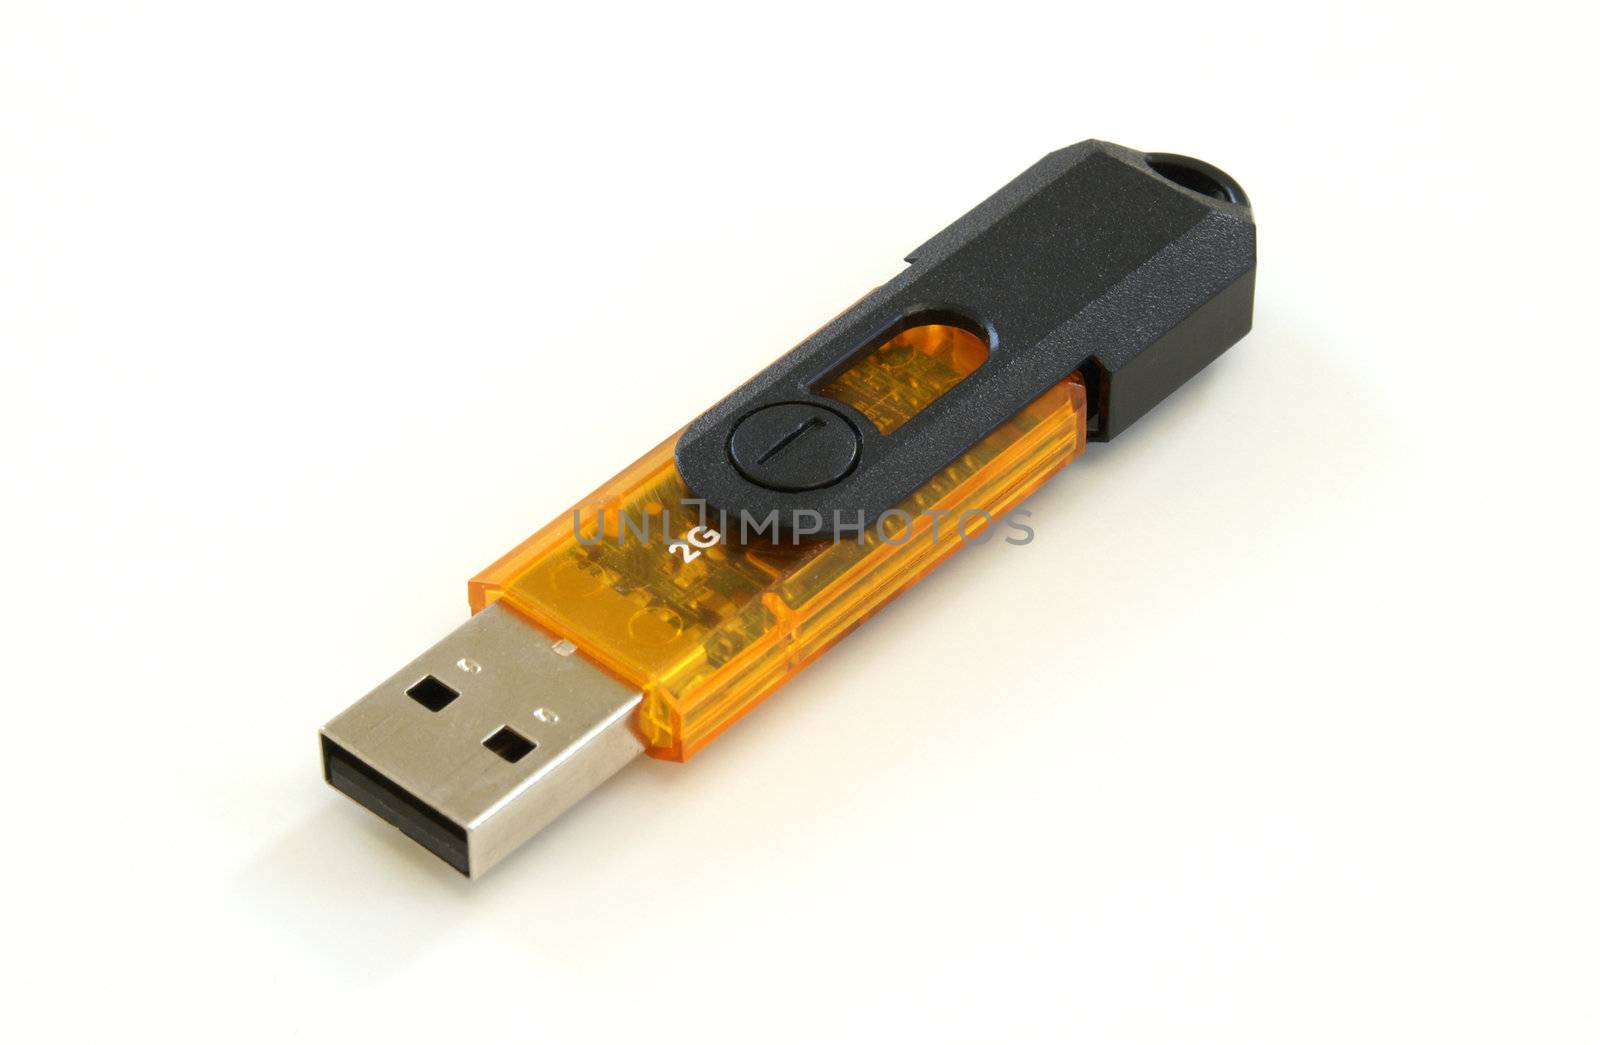 A USB device for storing data from your computer.